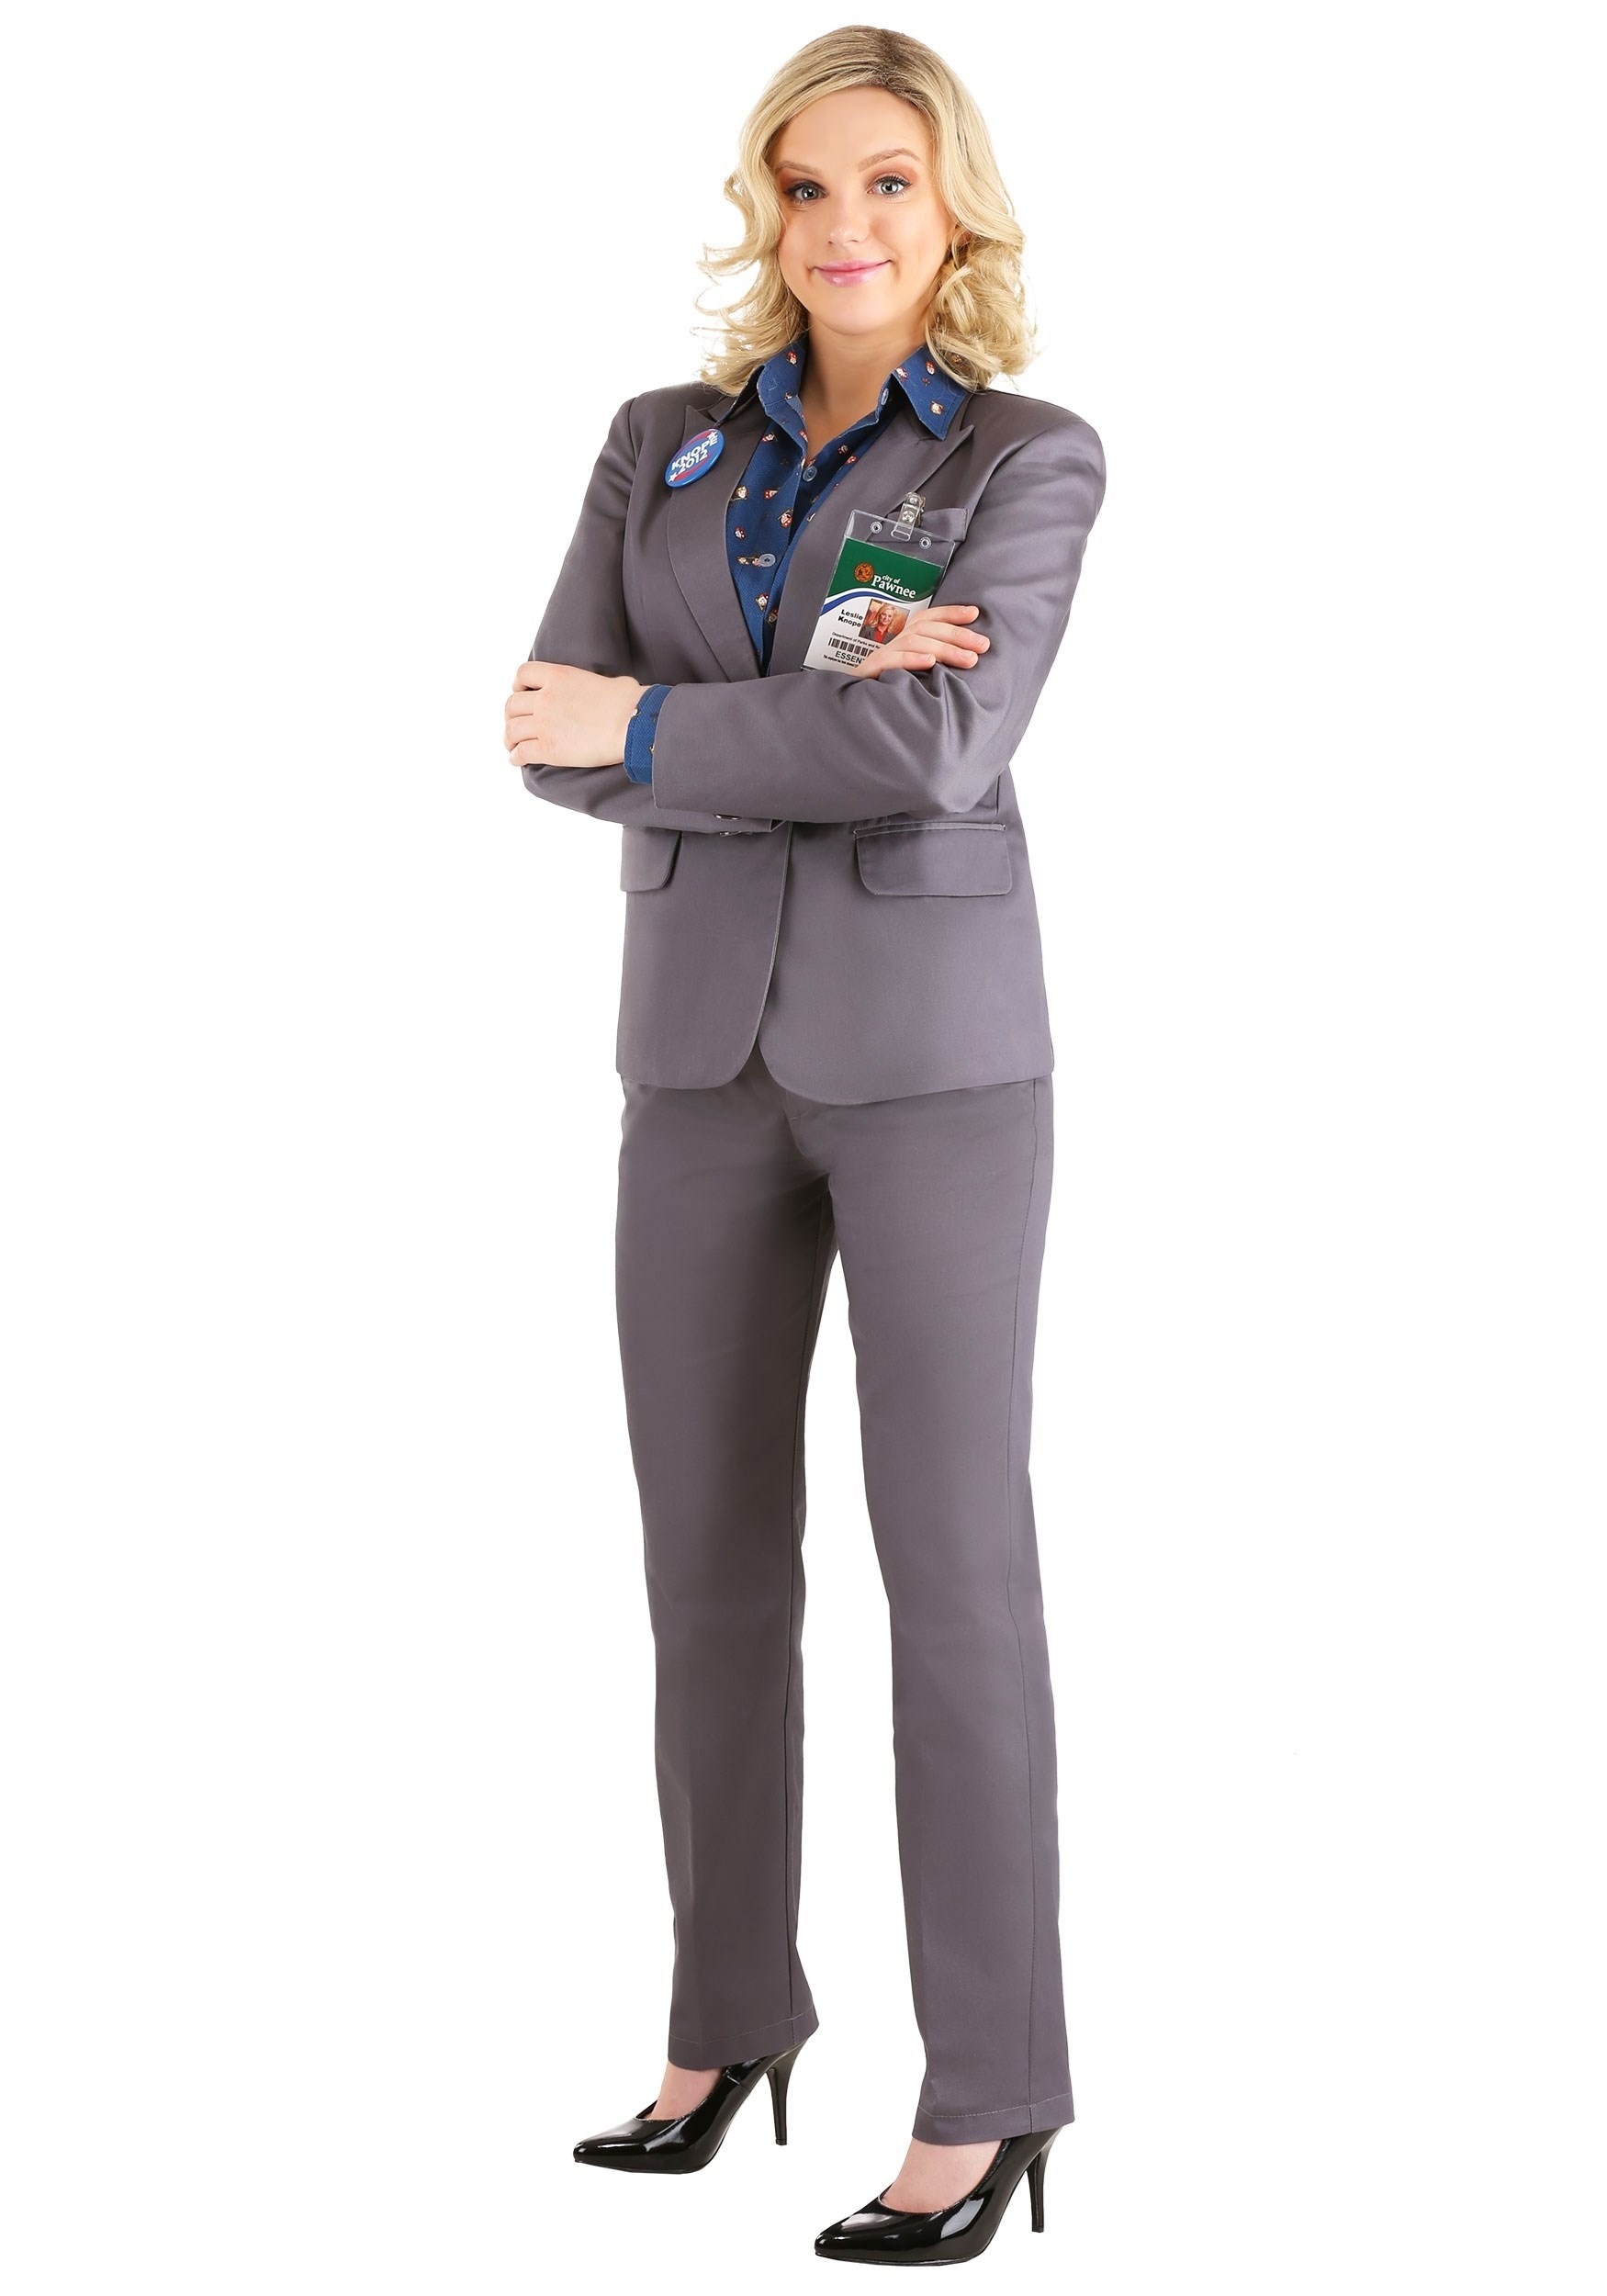 Photos - Fancy Dress A&D FUN Costumes Parks and Recreation Leslie Knope Women's Costume Gray/Bl 